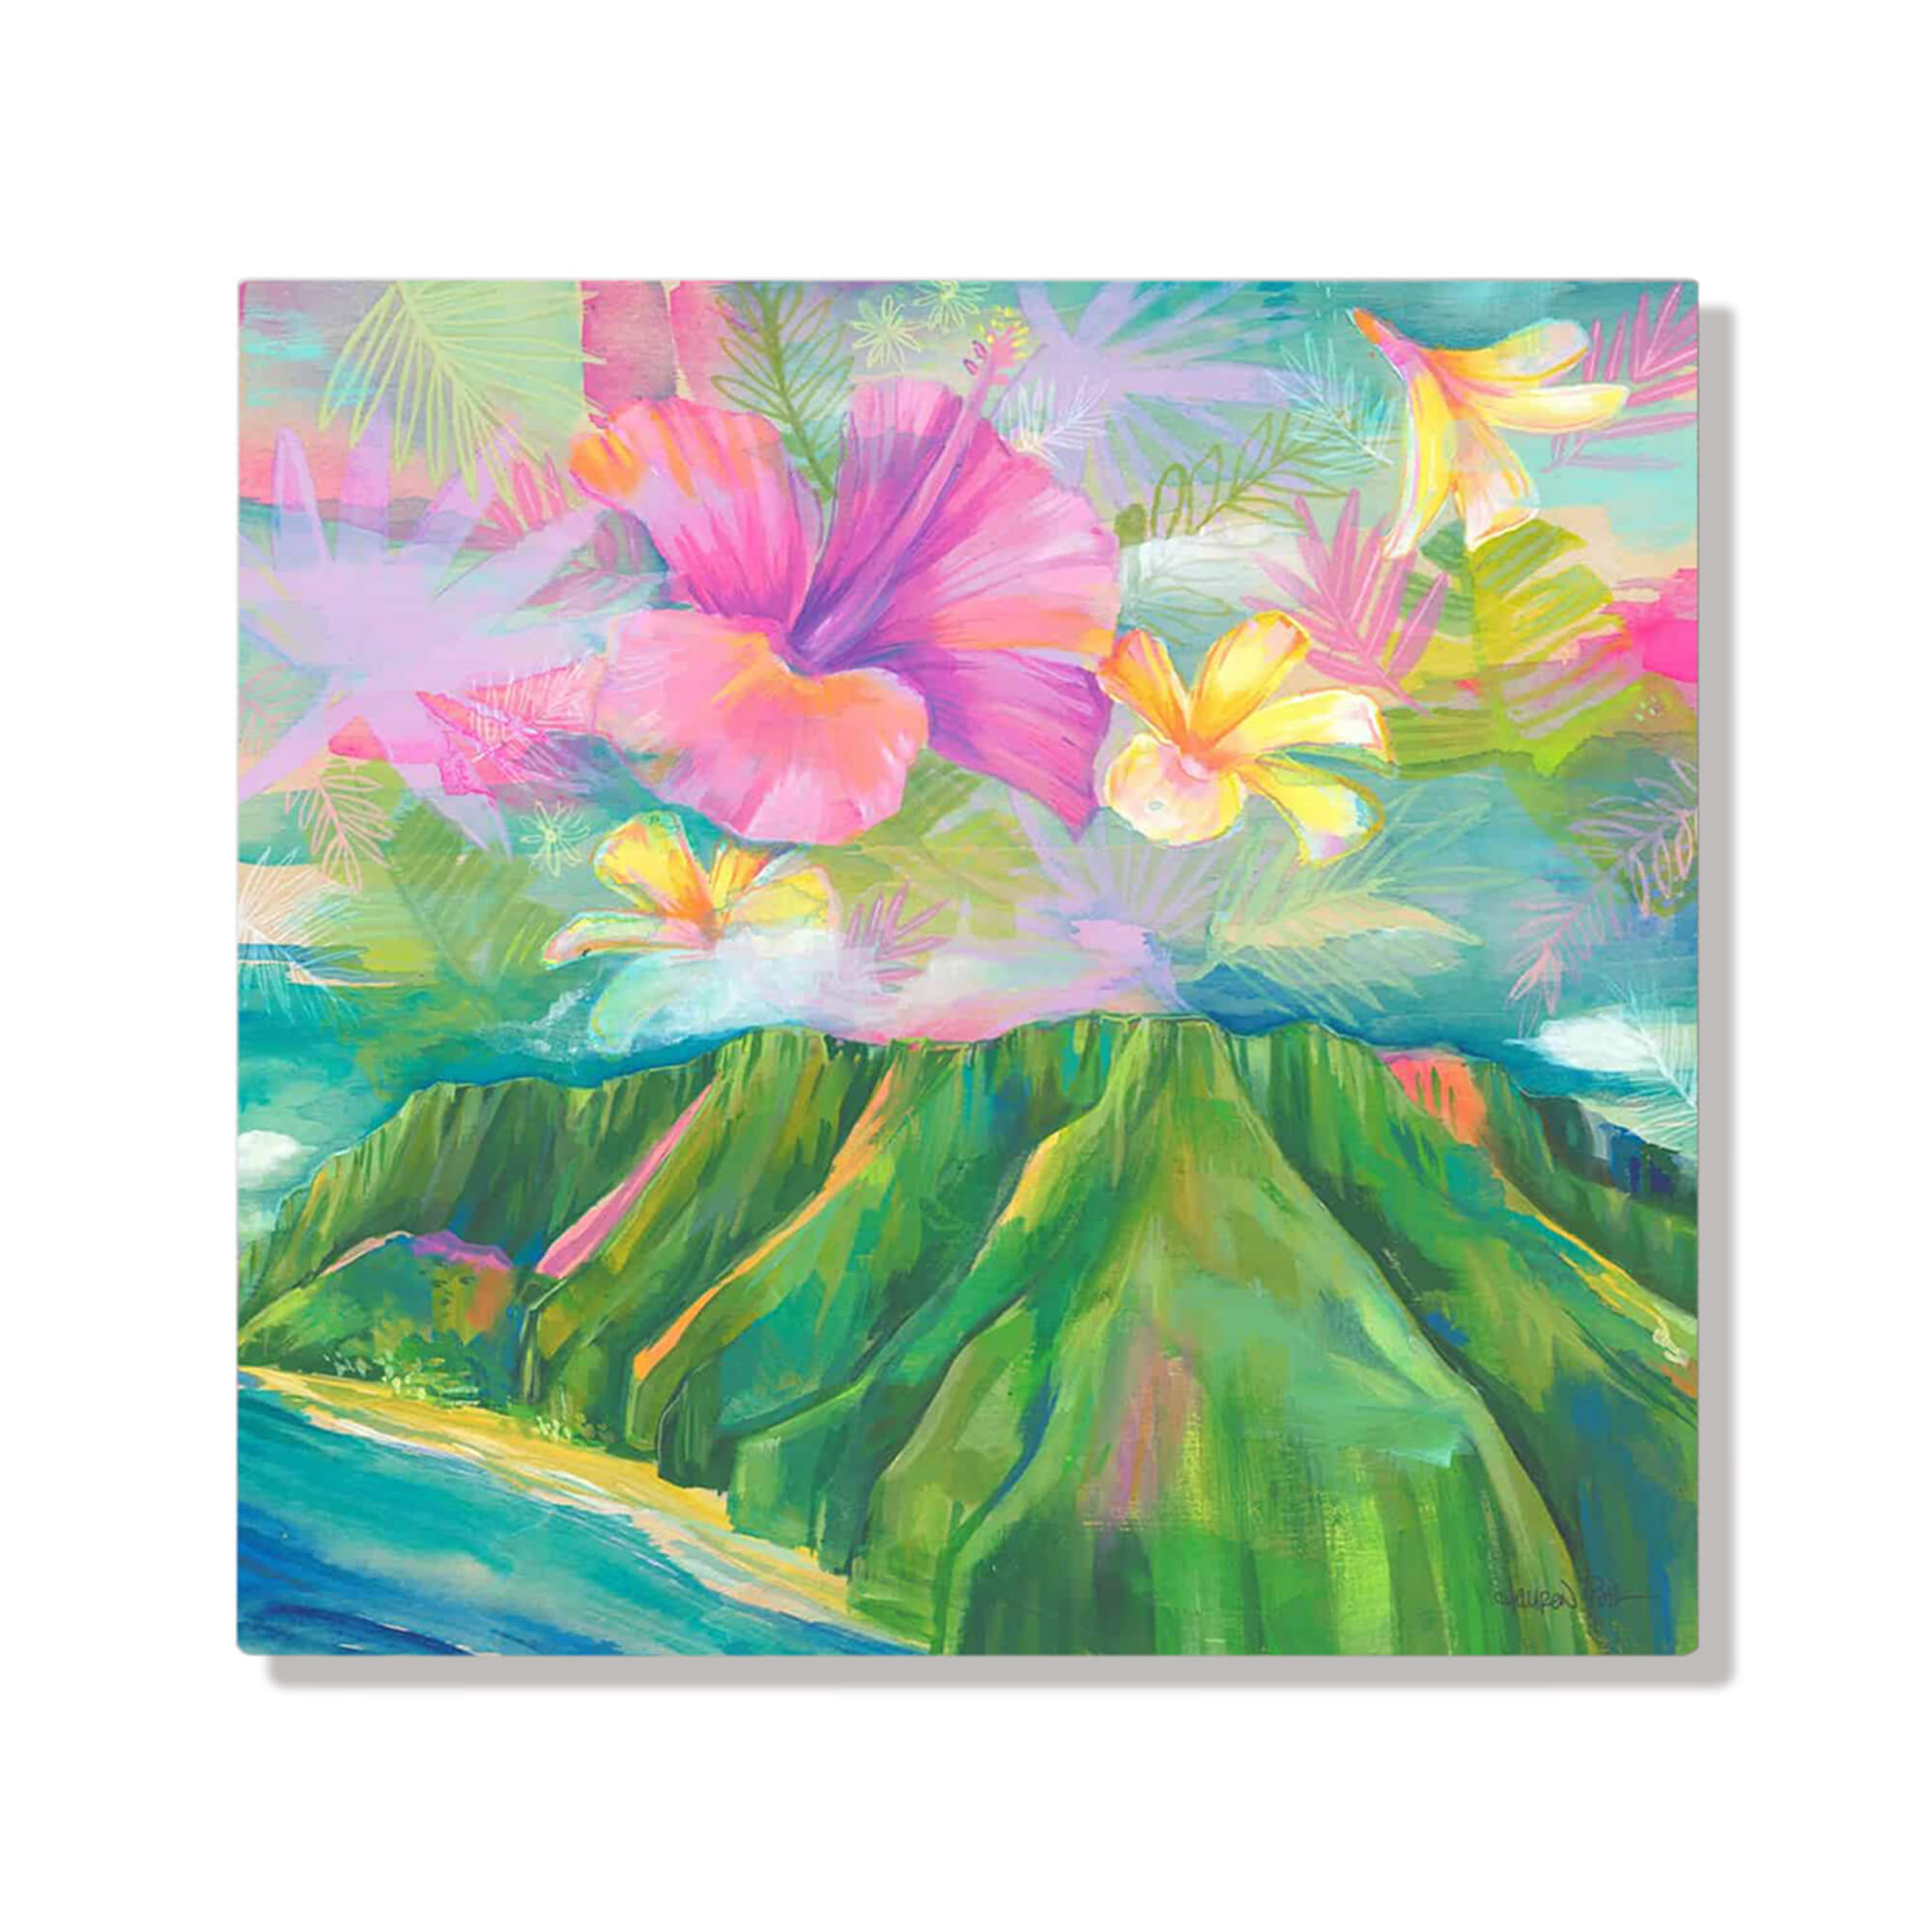 A metal art print showcasing the many shapes and hues of tropical island flora by Hawaii artist Lauren Roth